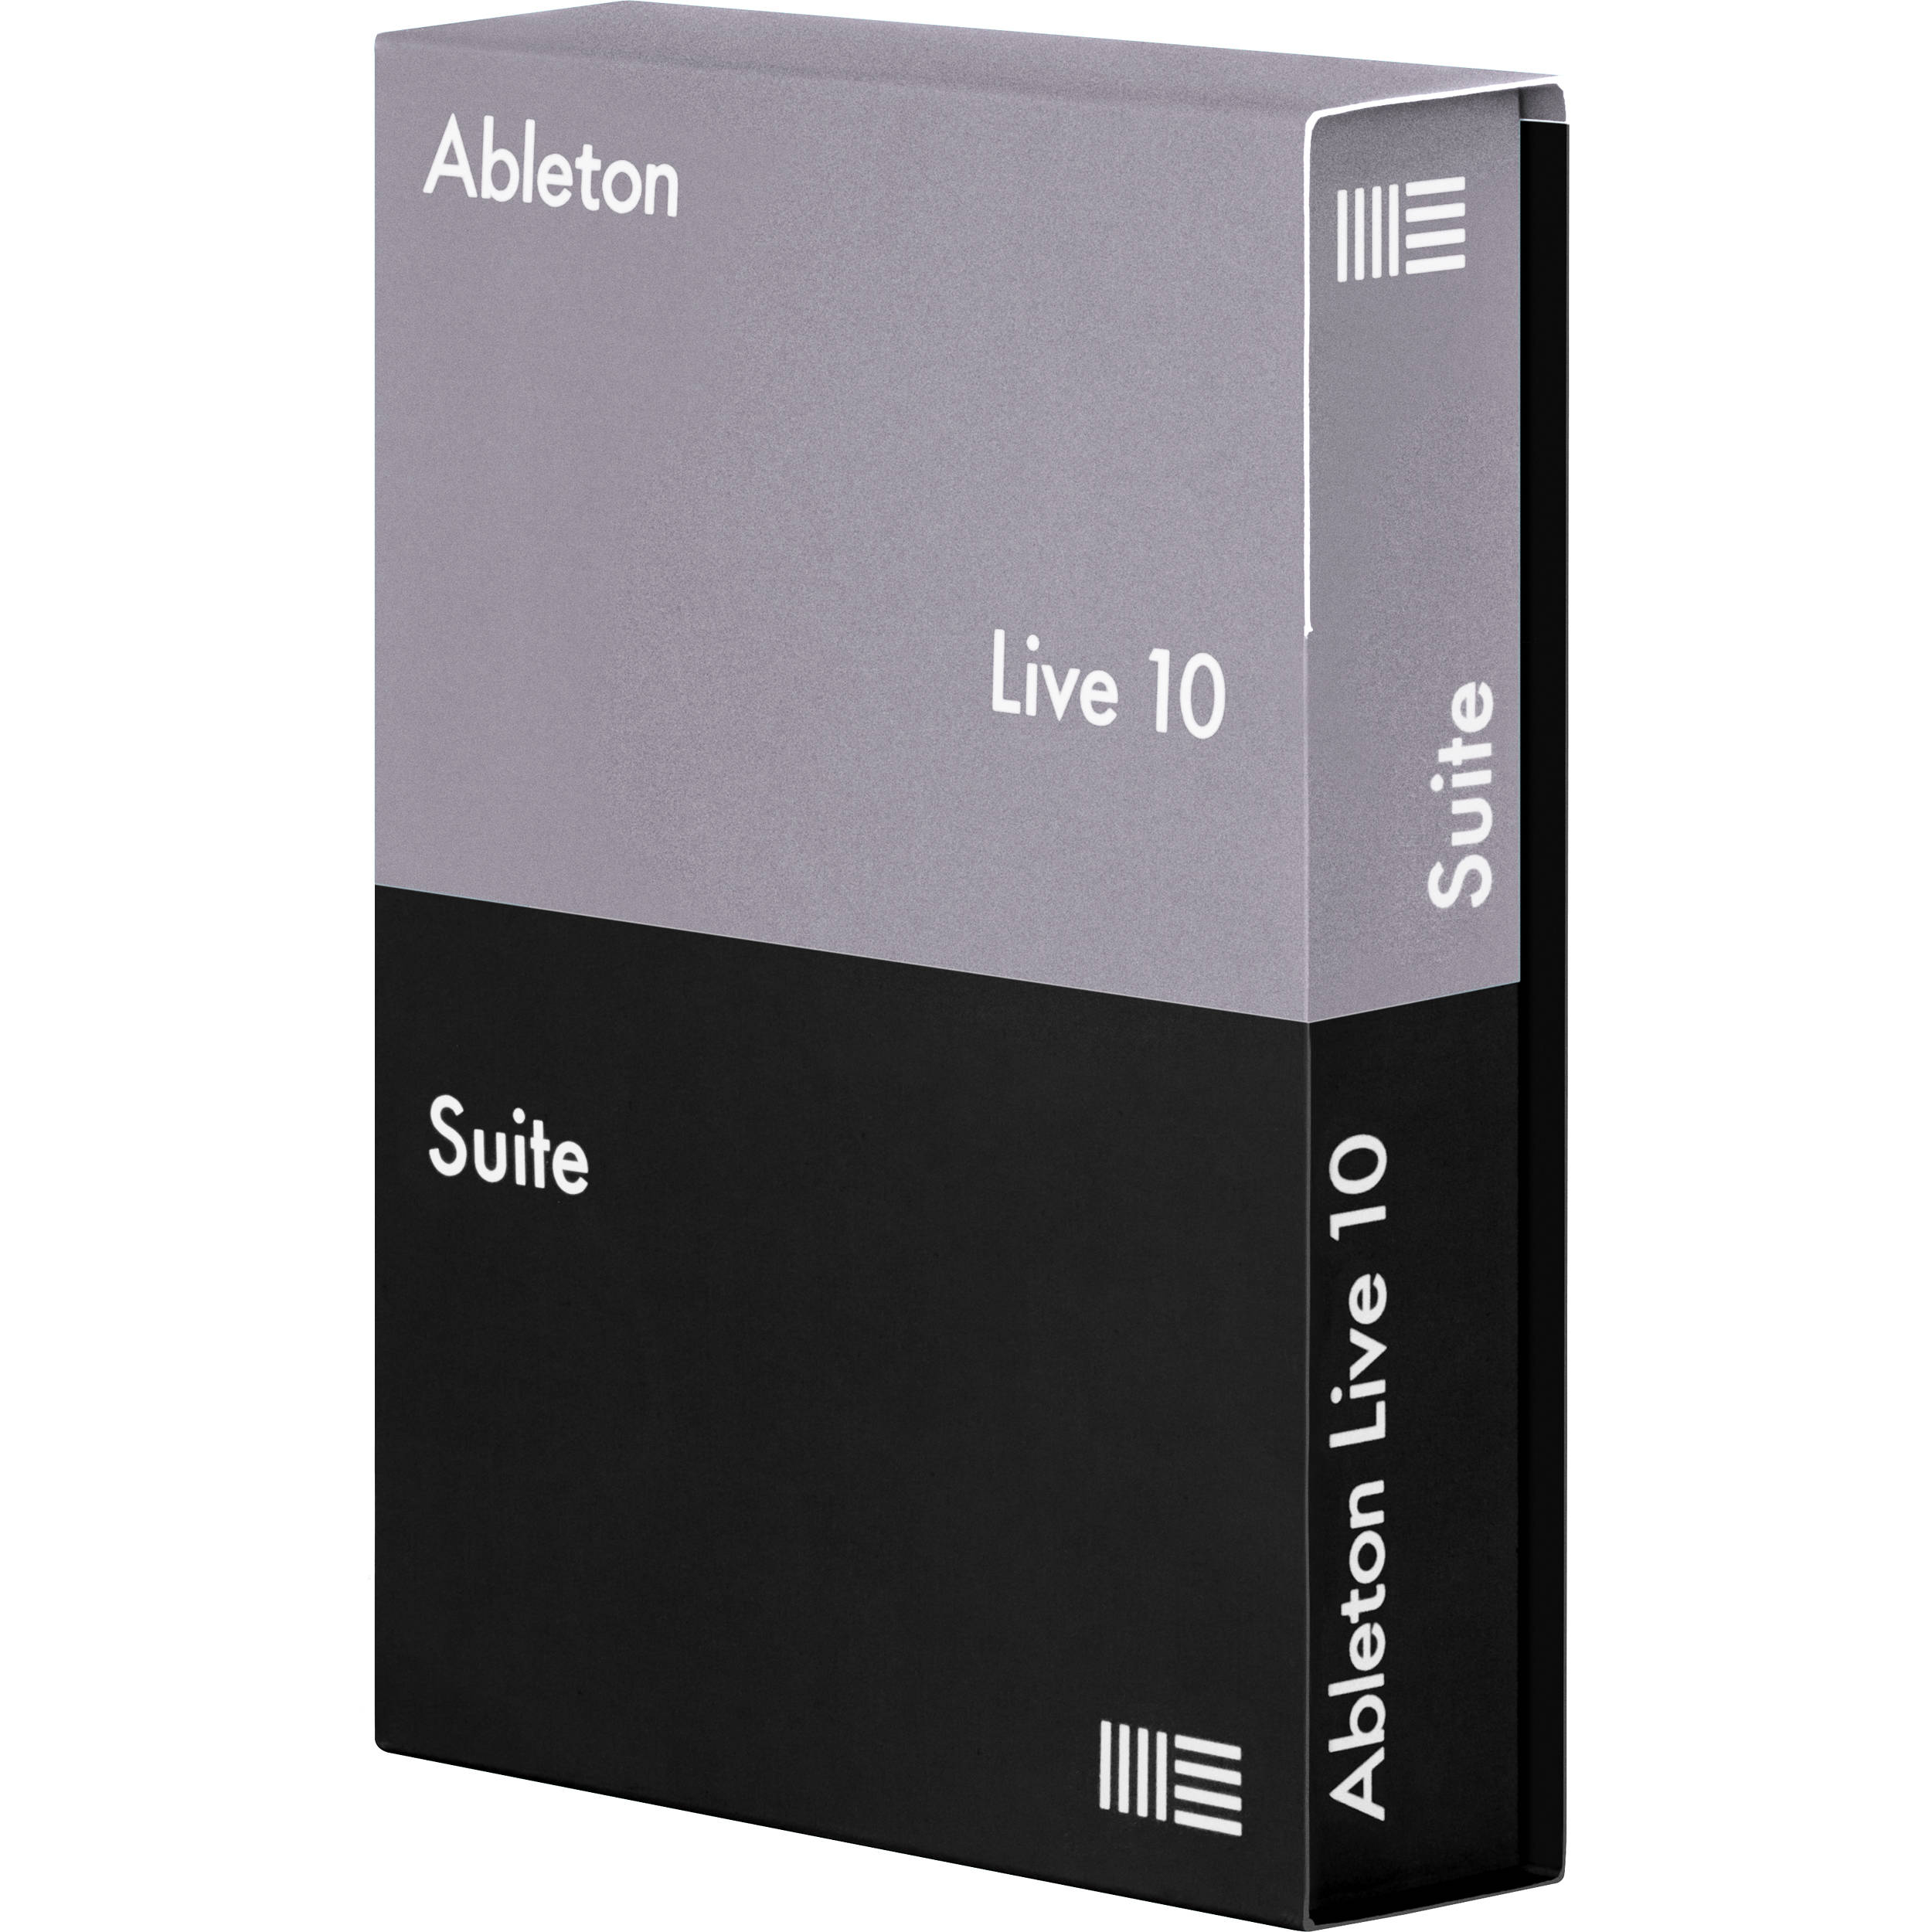 Ableton Releases Live 9 7 With New Features For Live 9 And Push Hardware Sweetwater